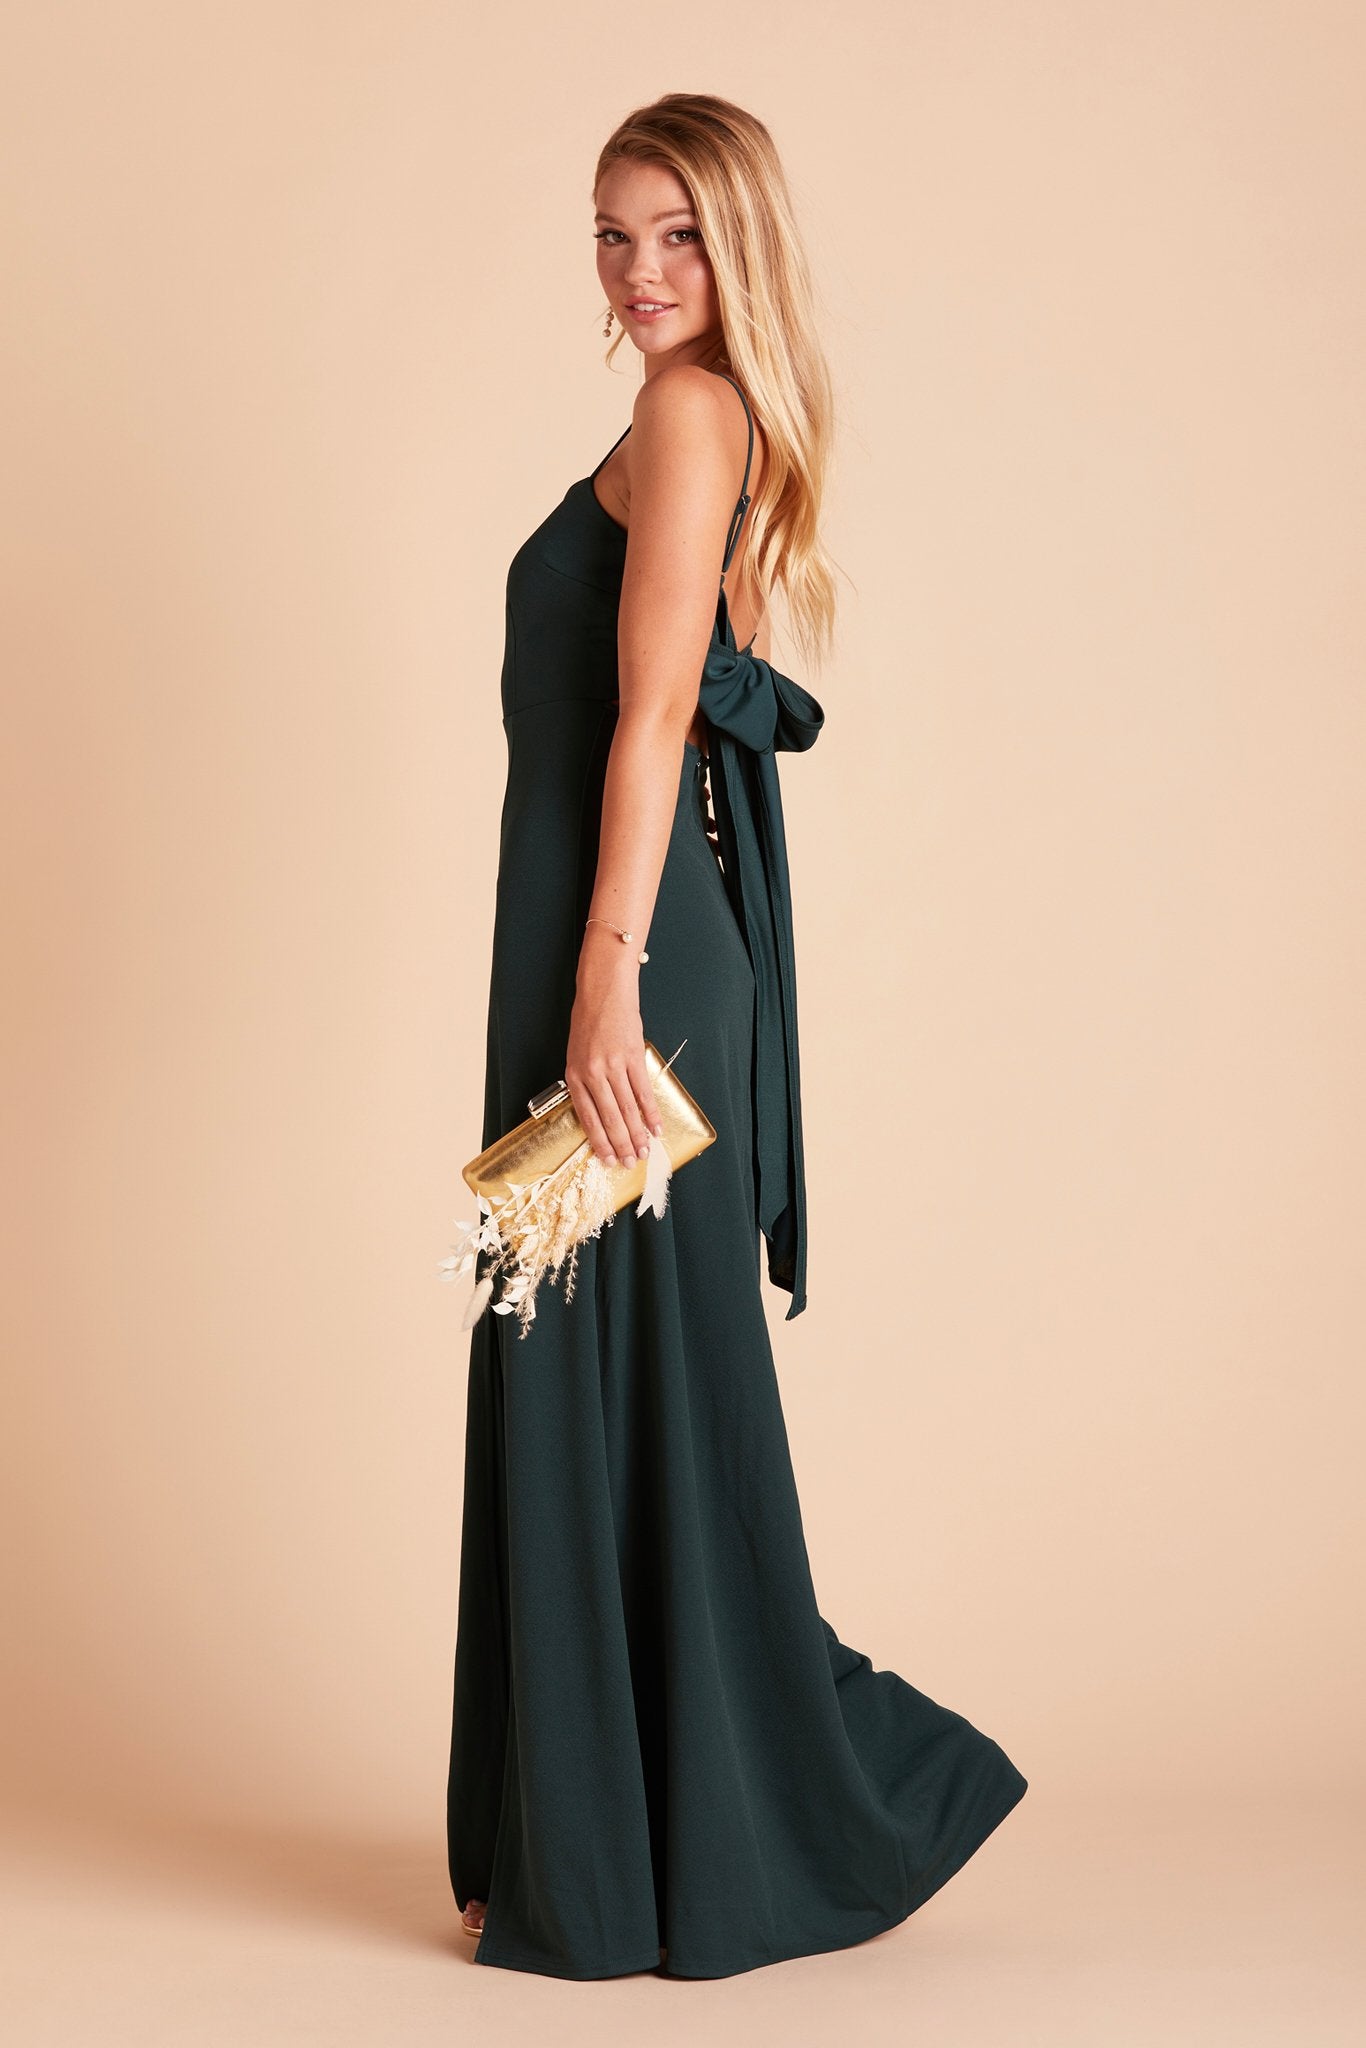 Benny bridesmaid dress in emerald green crepe by Birdy Grey, side view